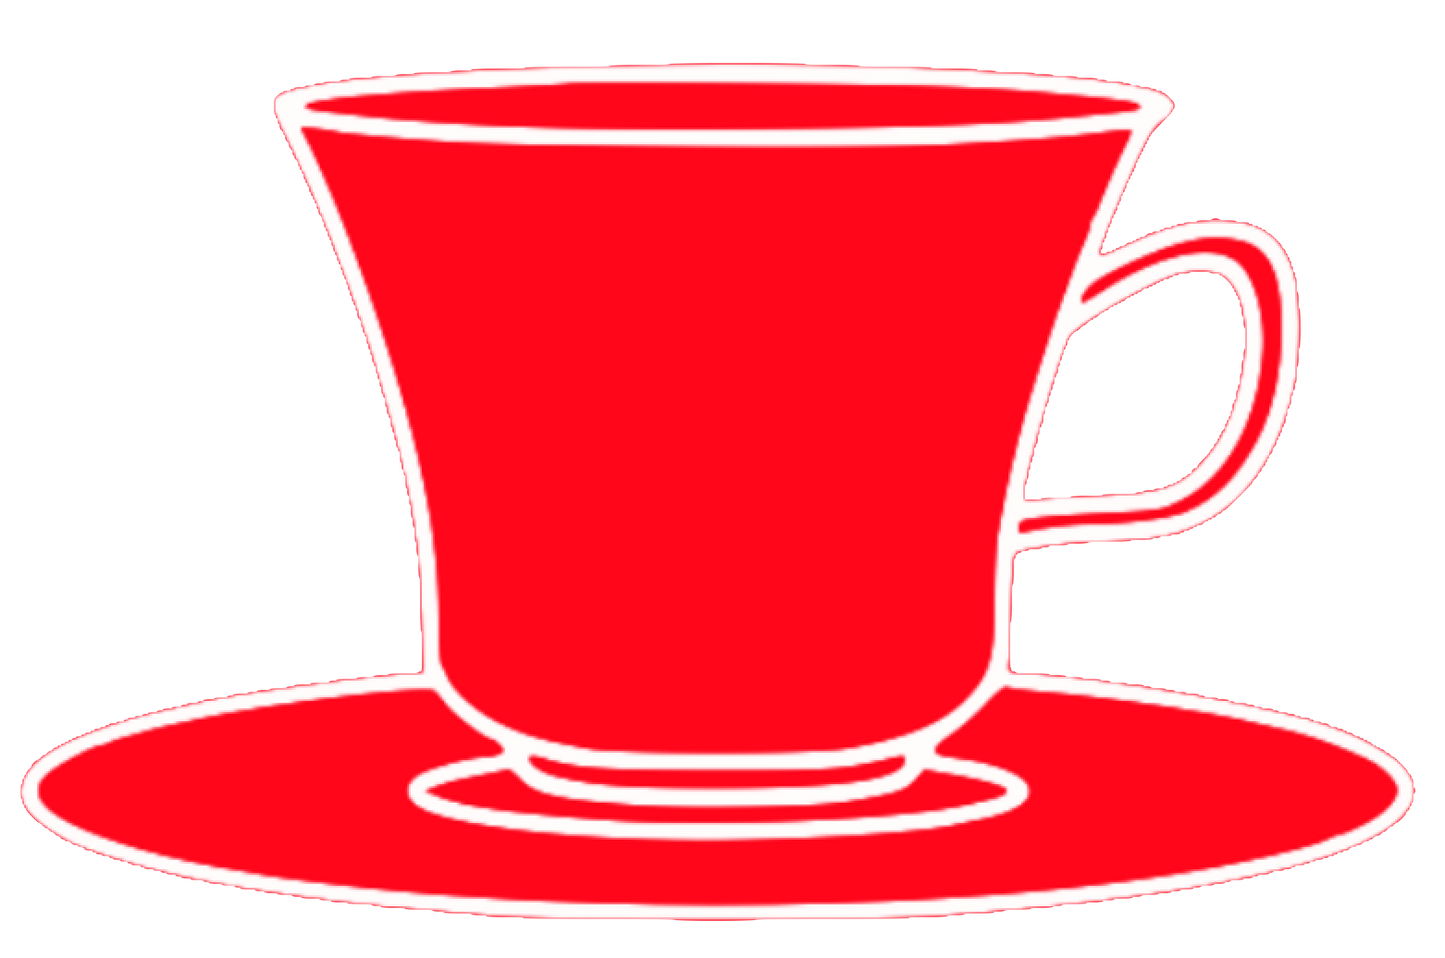 4 Red Teacups 4 separate images each different